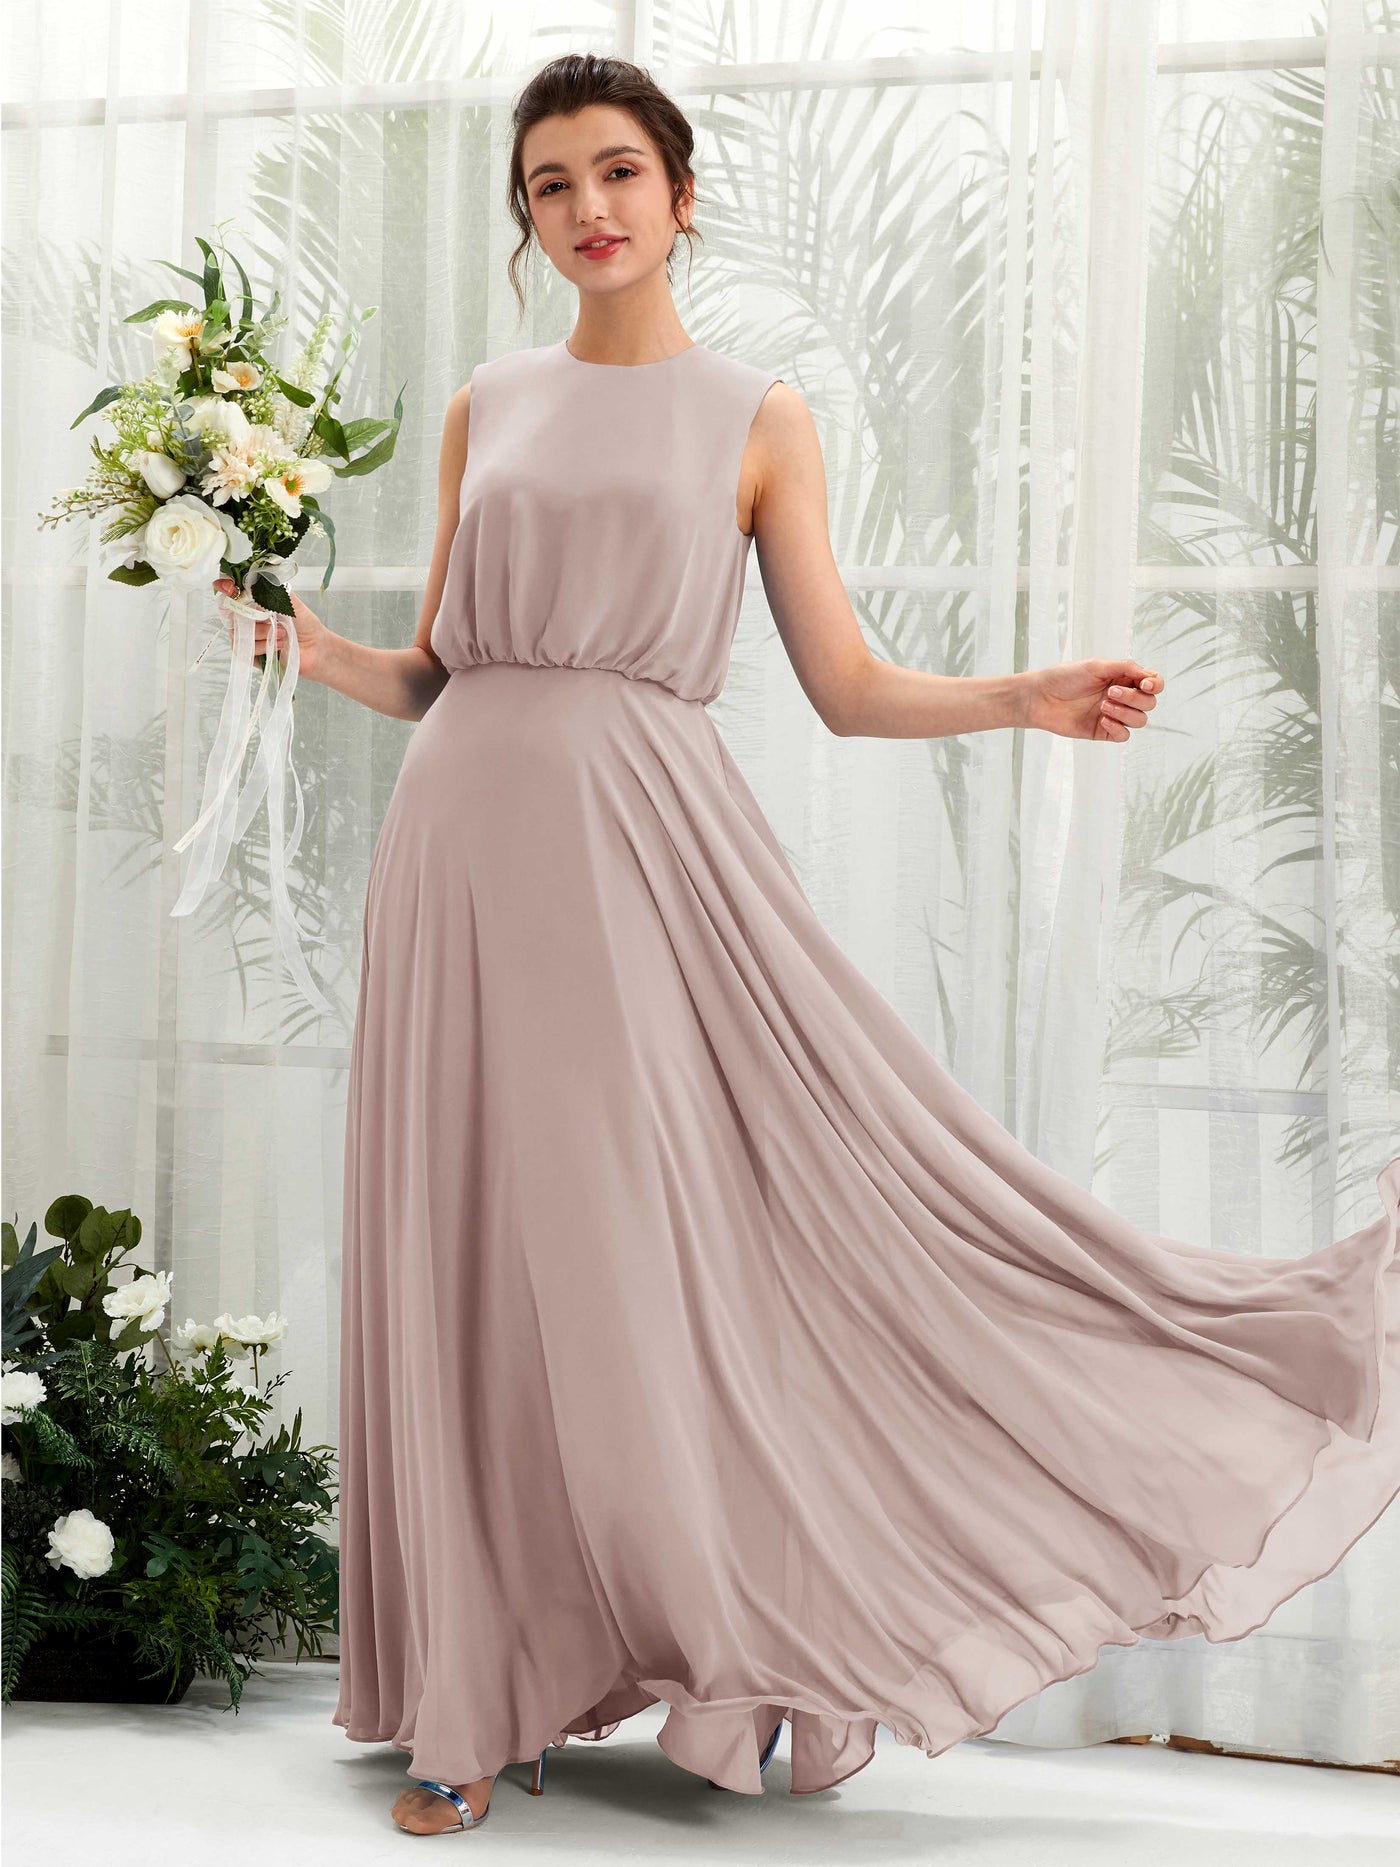 Taupe Bridesmaid Dresses Bridesmaid Dress A-line Chiffon Round Full Length Sleeveless Wedding Party Dress (81222824)#color_taupe